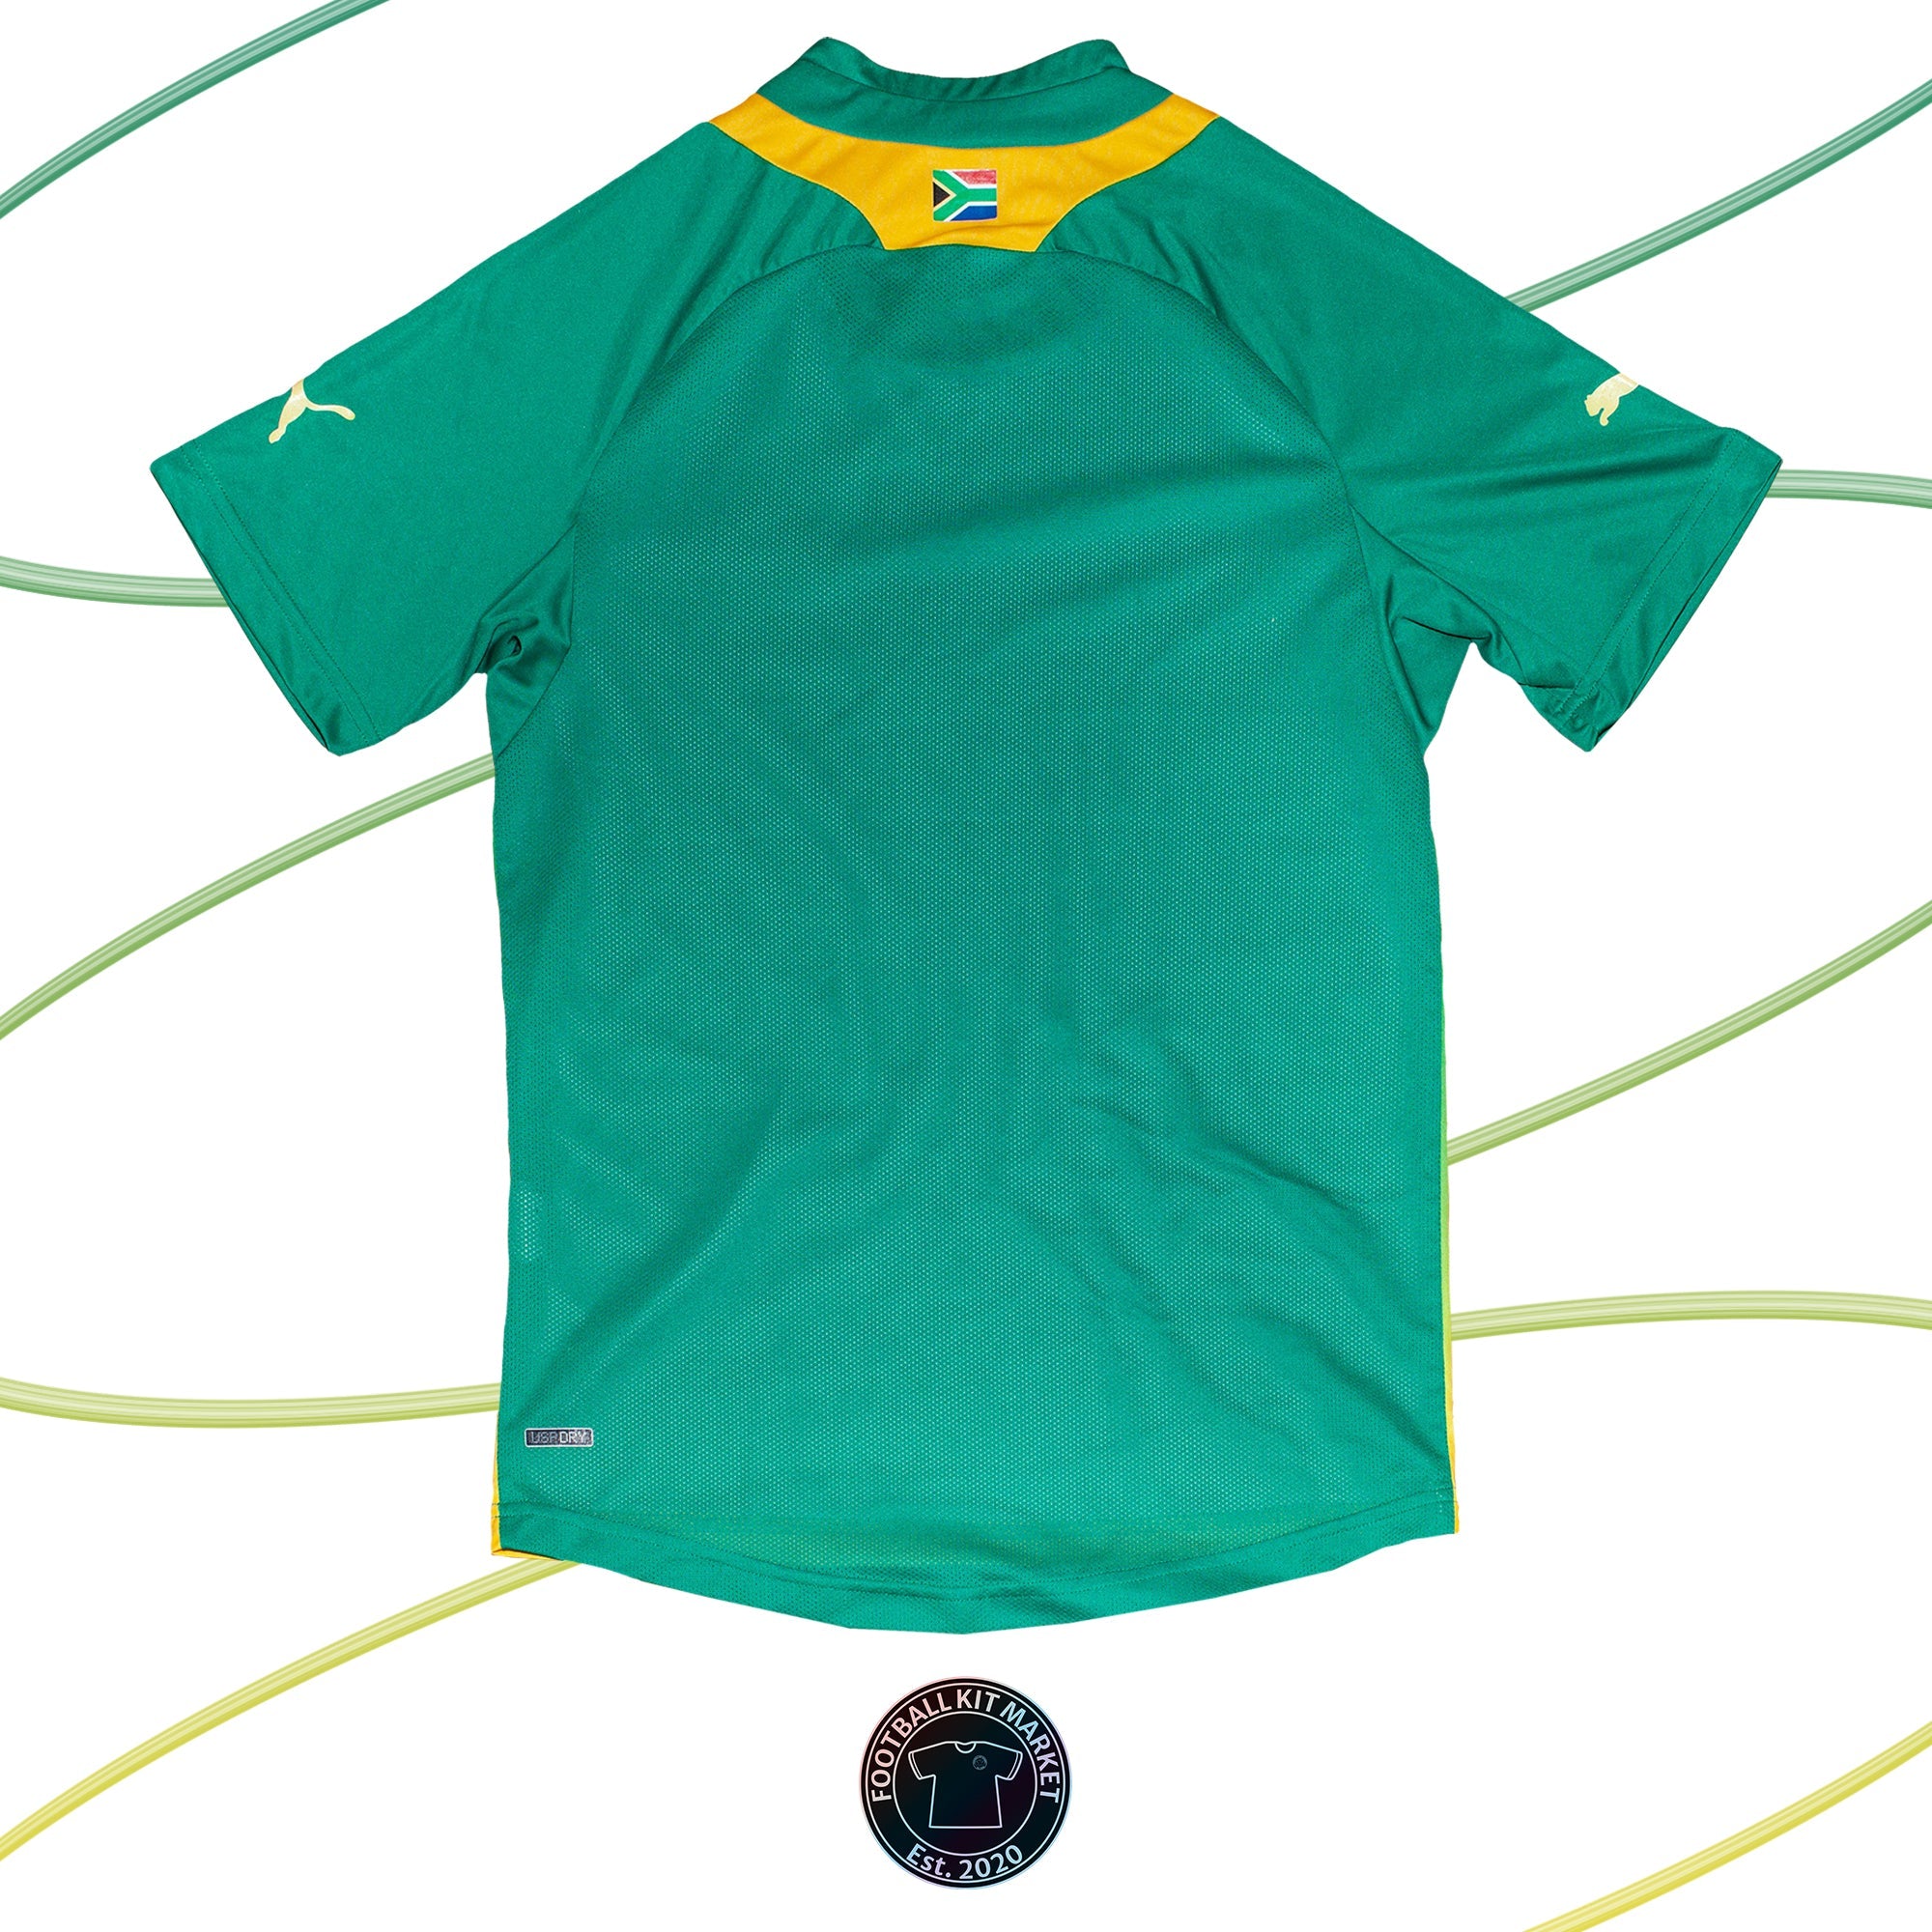 Genuine SOUTH AFRICA Away Shirt (2013-2014) - PUMA (M) - Product Image from Football Kit Market